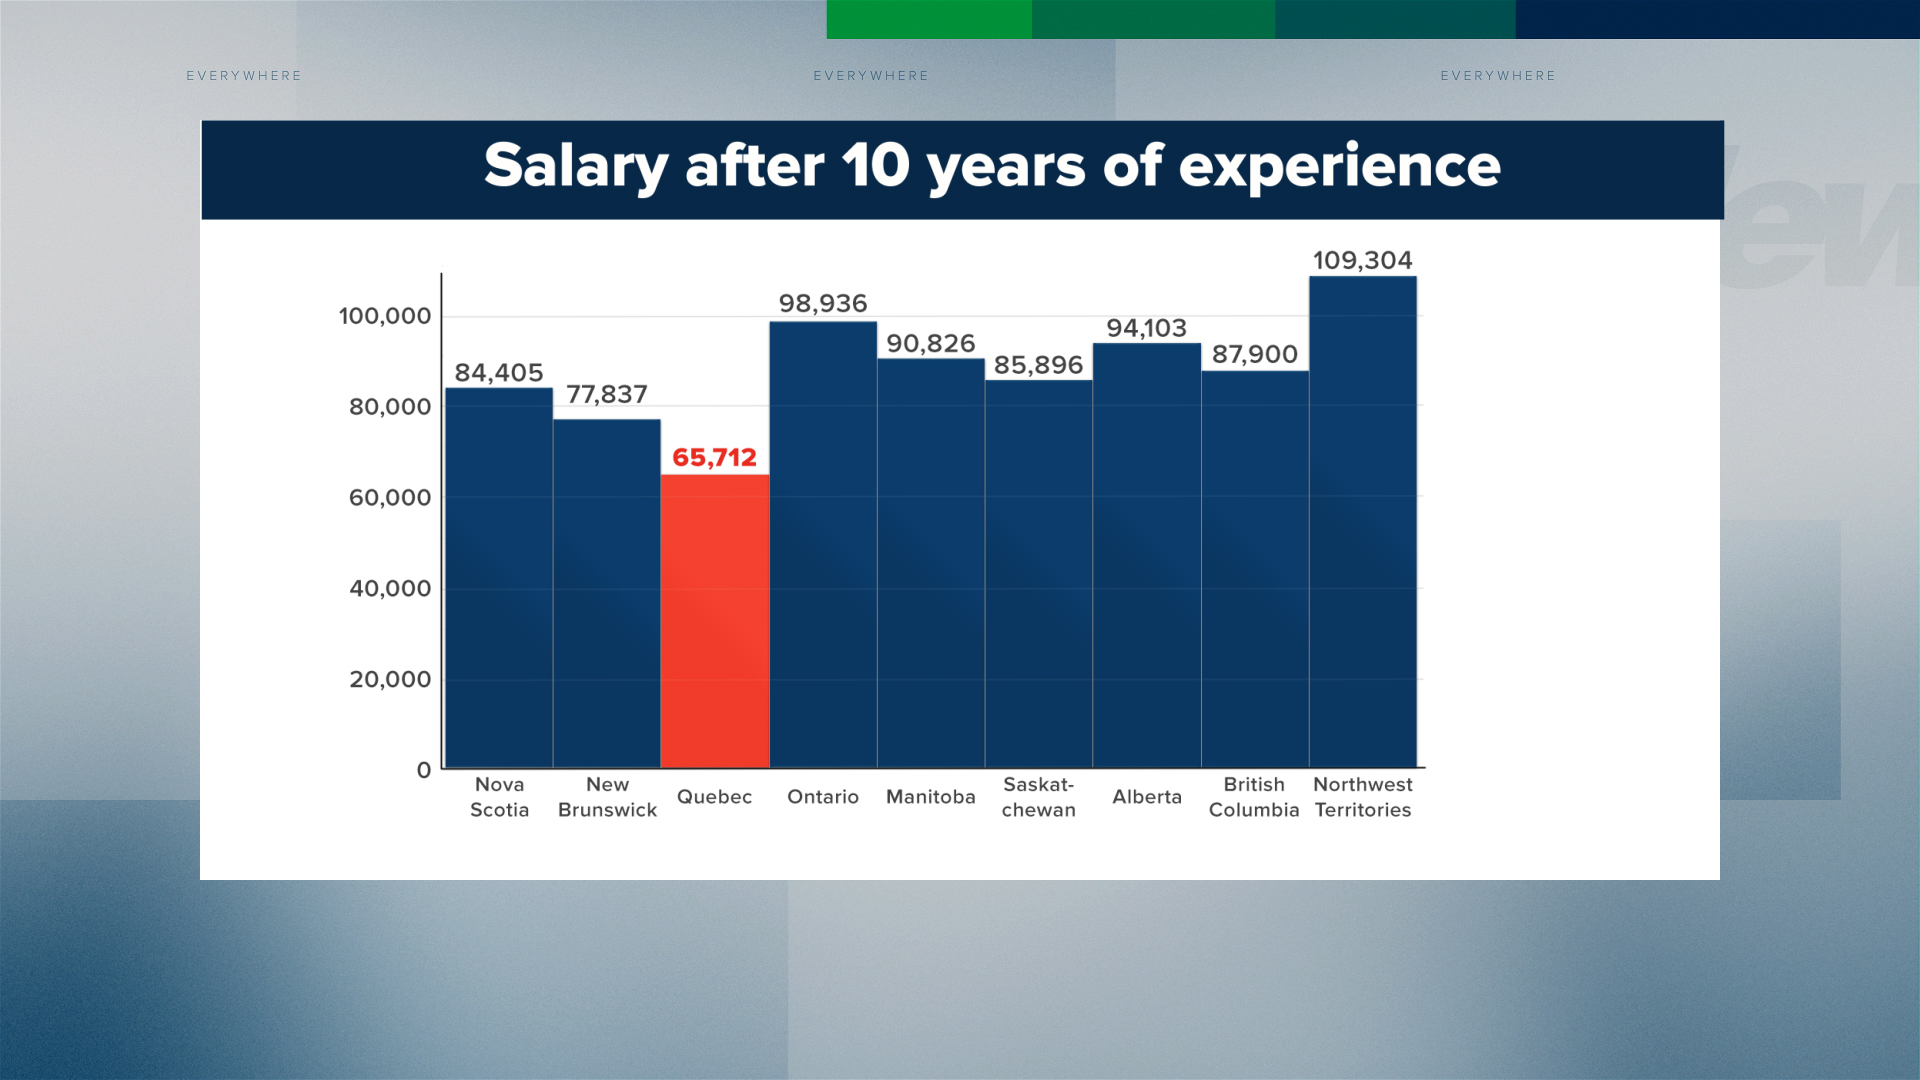 Data showing the salary of teachers after 10 years of experience throughout Canada